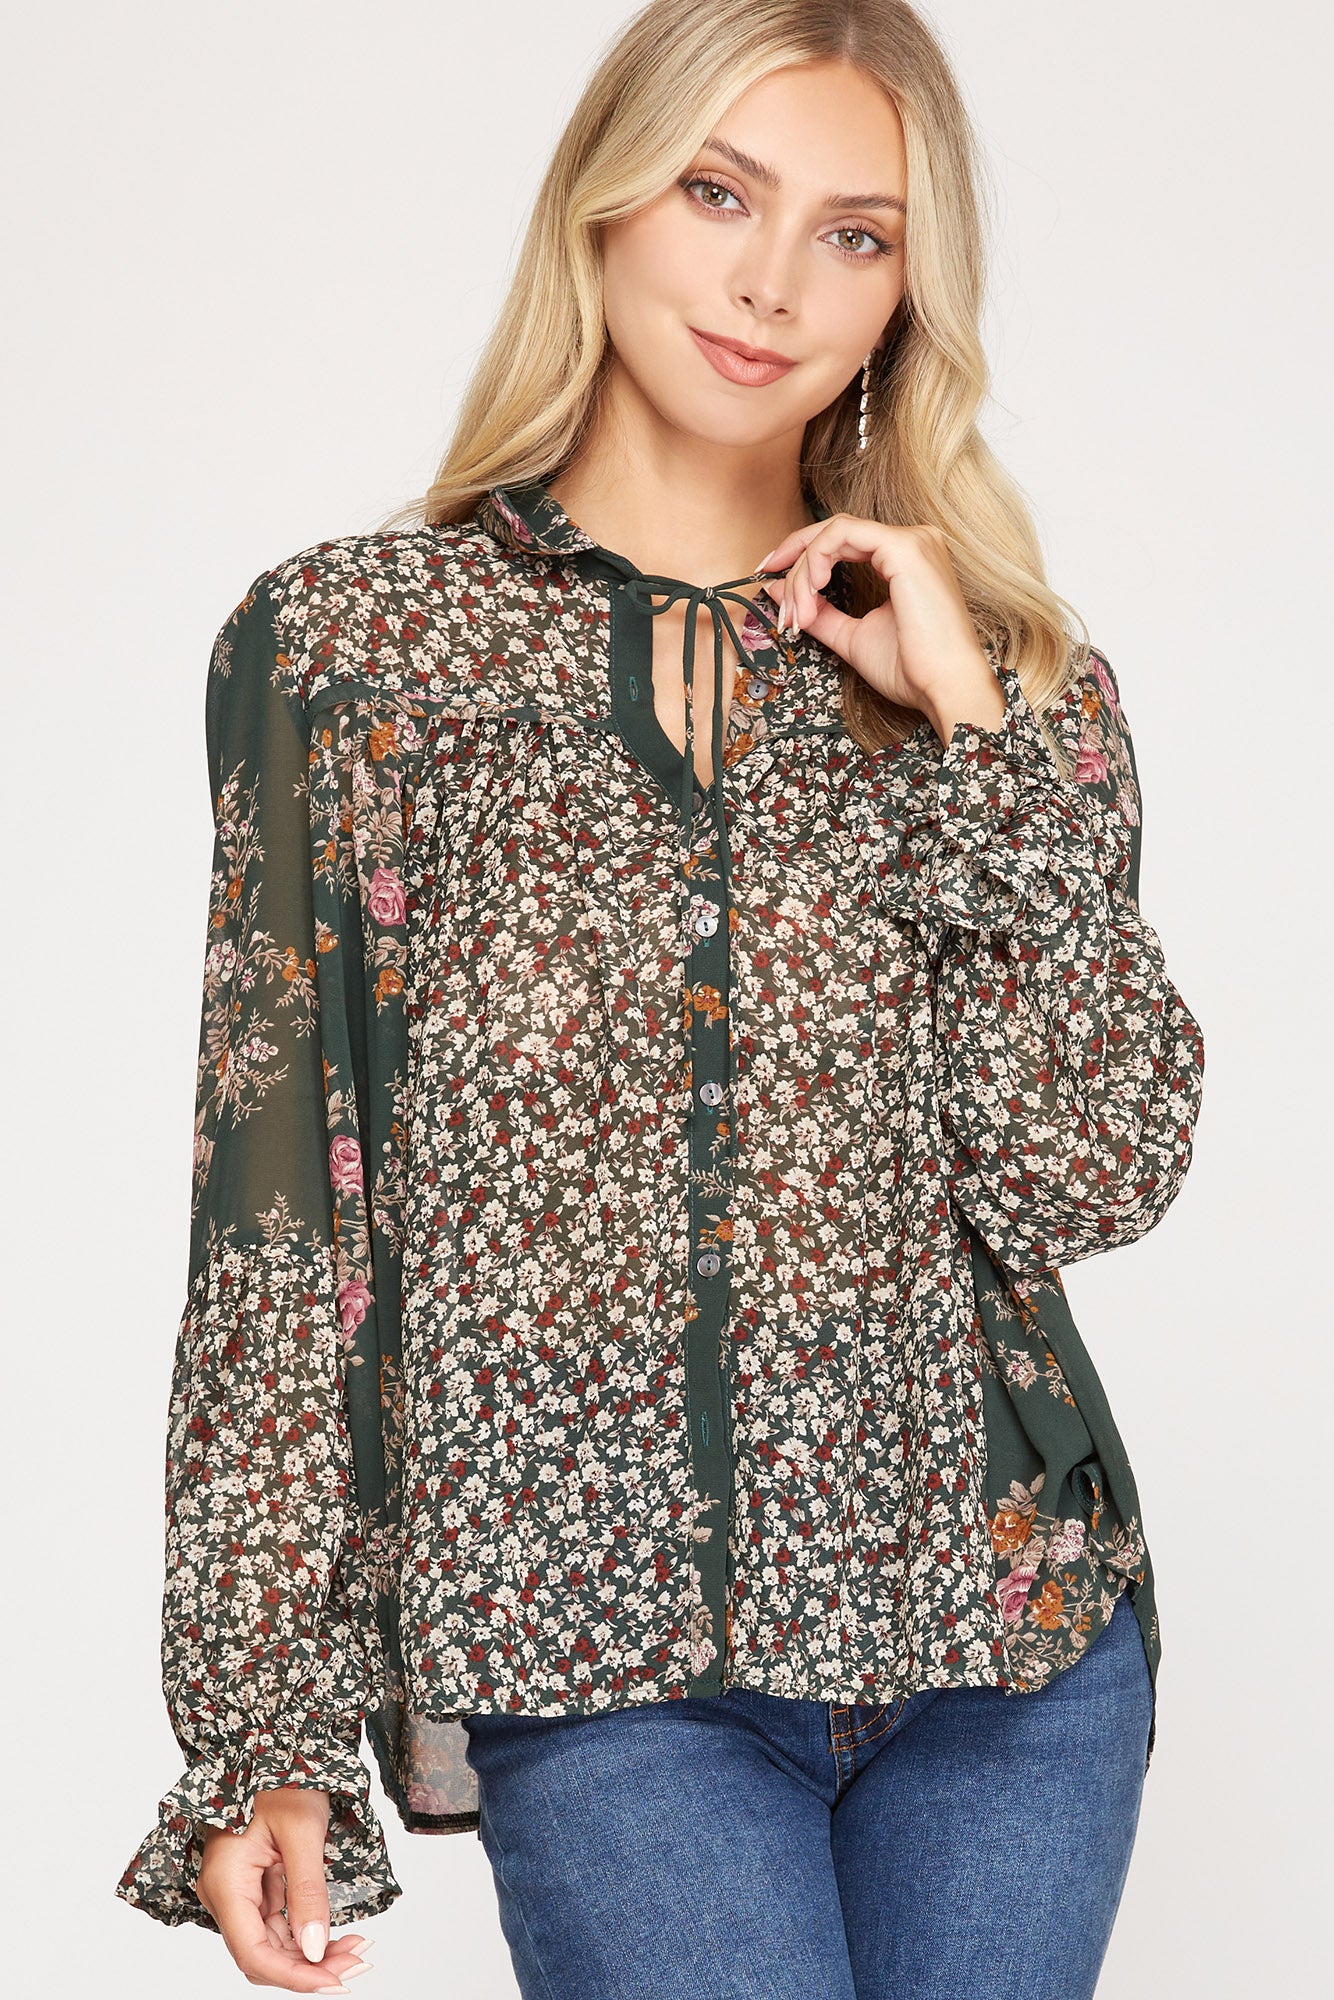 Long Sleeve Woven Floral Top!